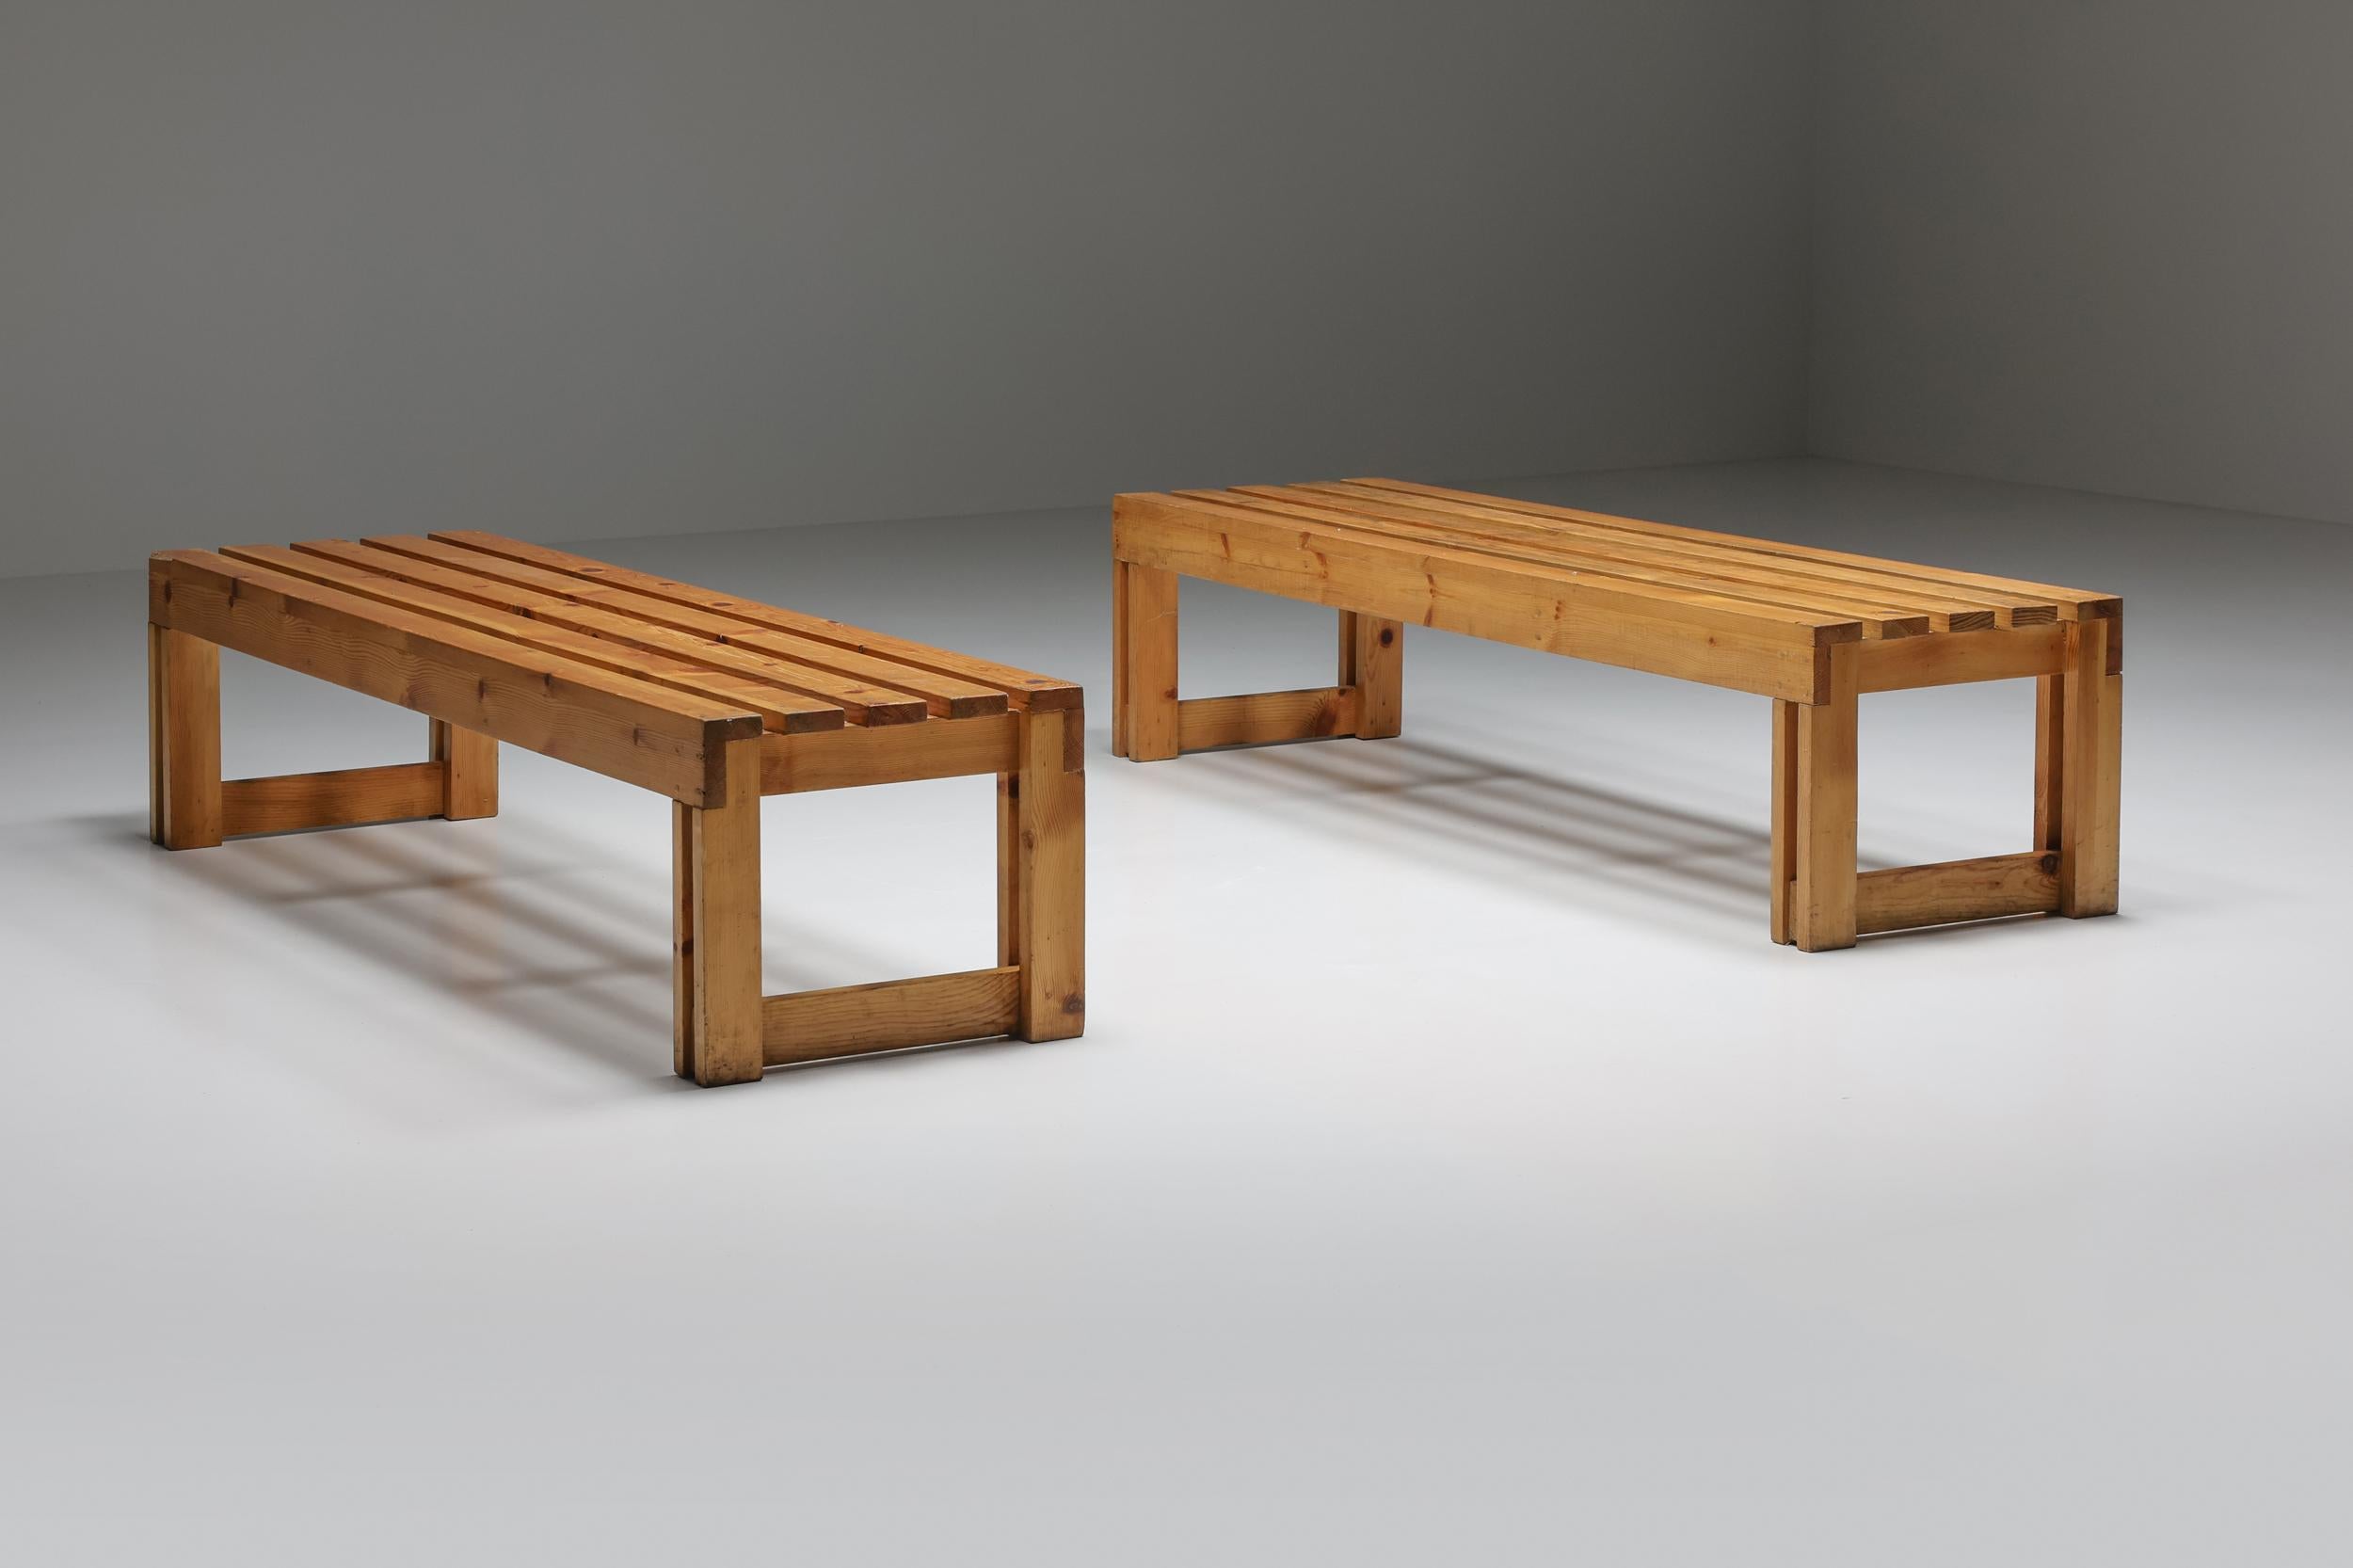 Mid-20th Century Italian Pine Bench and Table Set from Old Vineyard, Modernist, Italy, 1960's For Sale